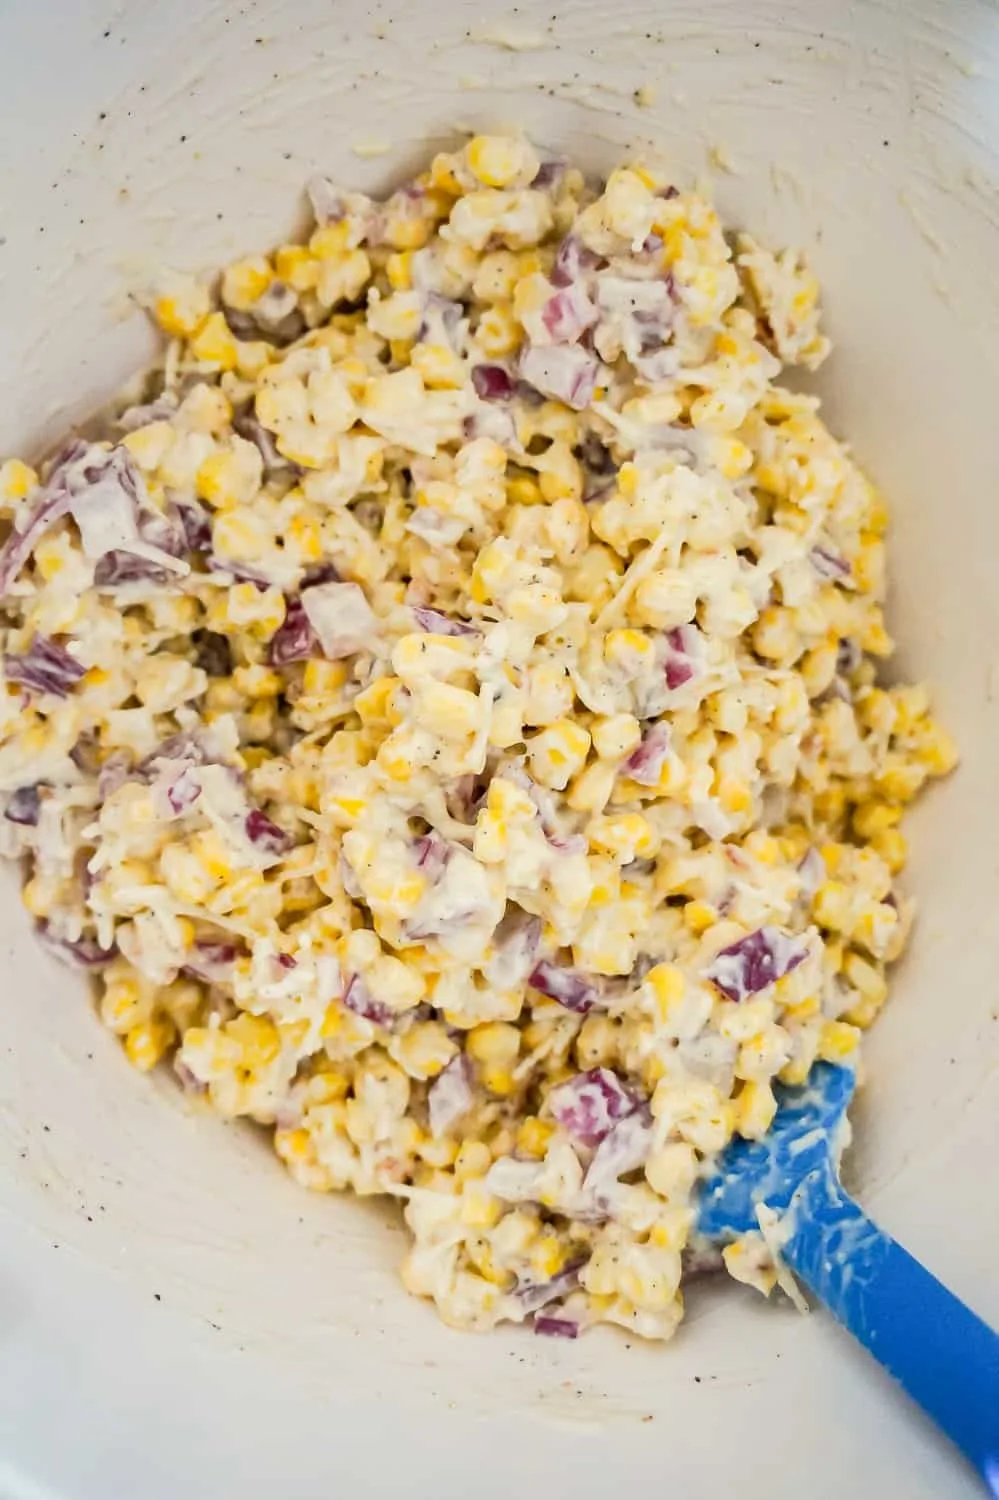 corn, red onions and cream soup mixture in a mixing bowl